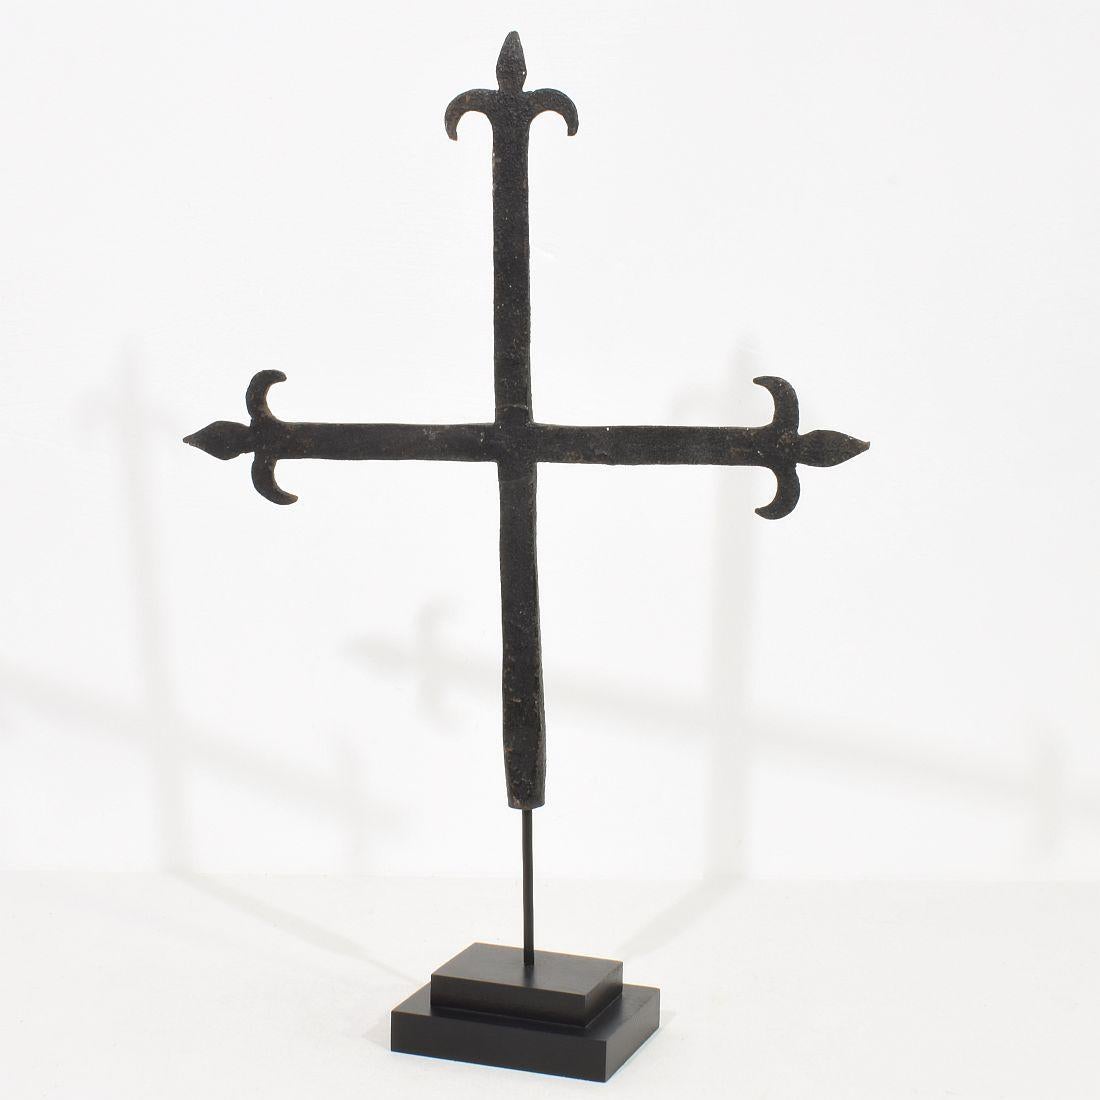 Unique hand forged iron cross that once stood in the centre of a Provençal village.
France, circa 1650-1750. Weathered.
Measurement is with the wooden base.